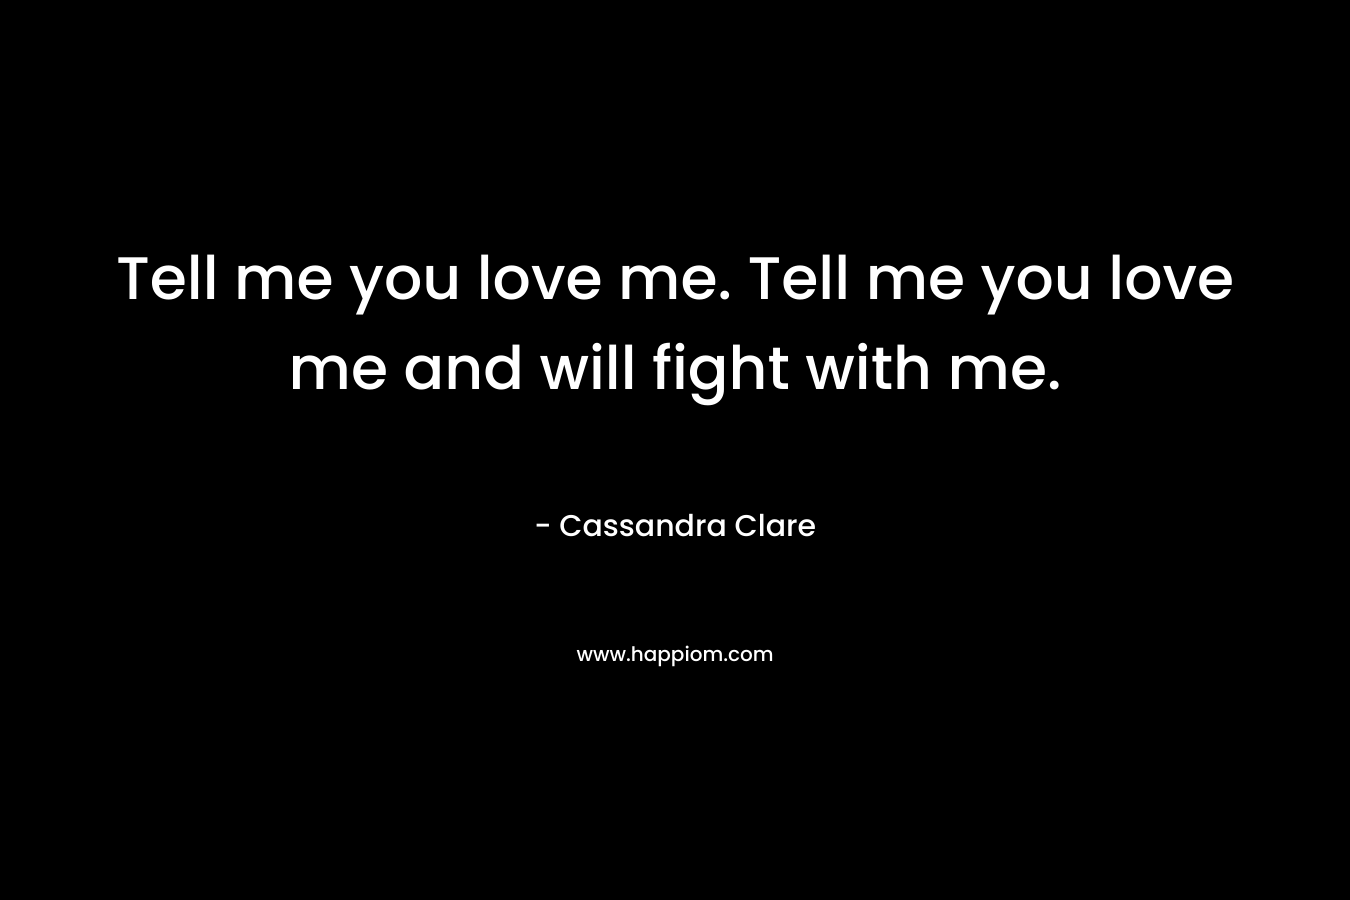 Tell me you love me. Tell me you love me and will fight with me. – Cassandra Clare